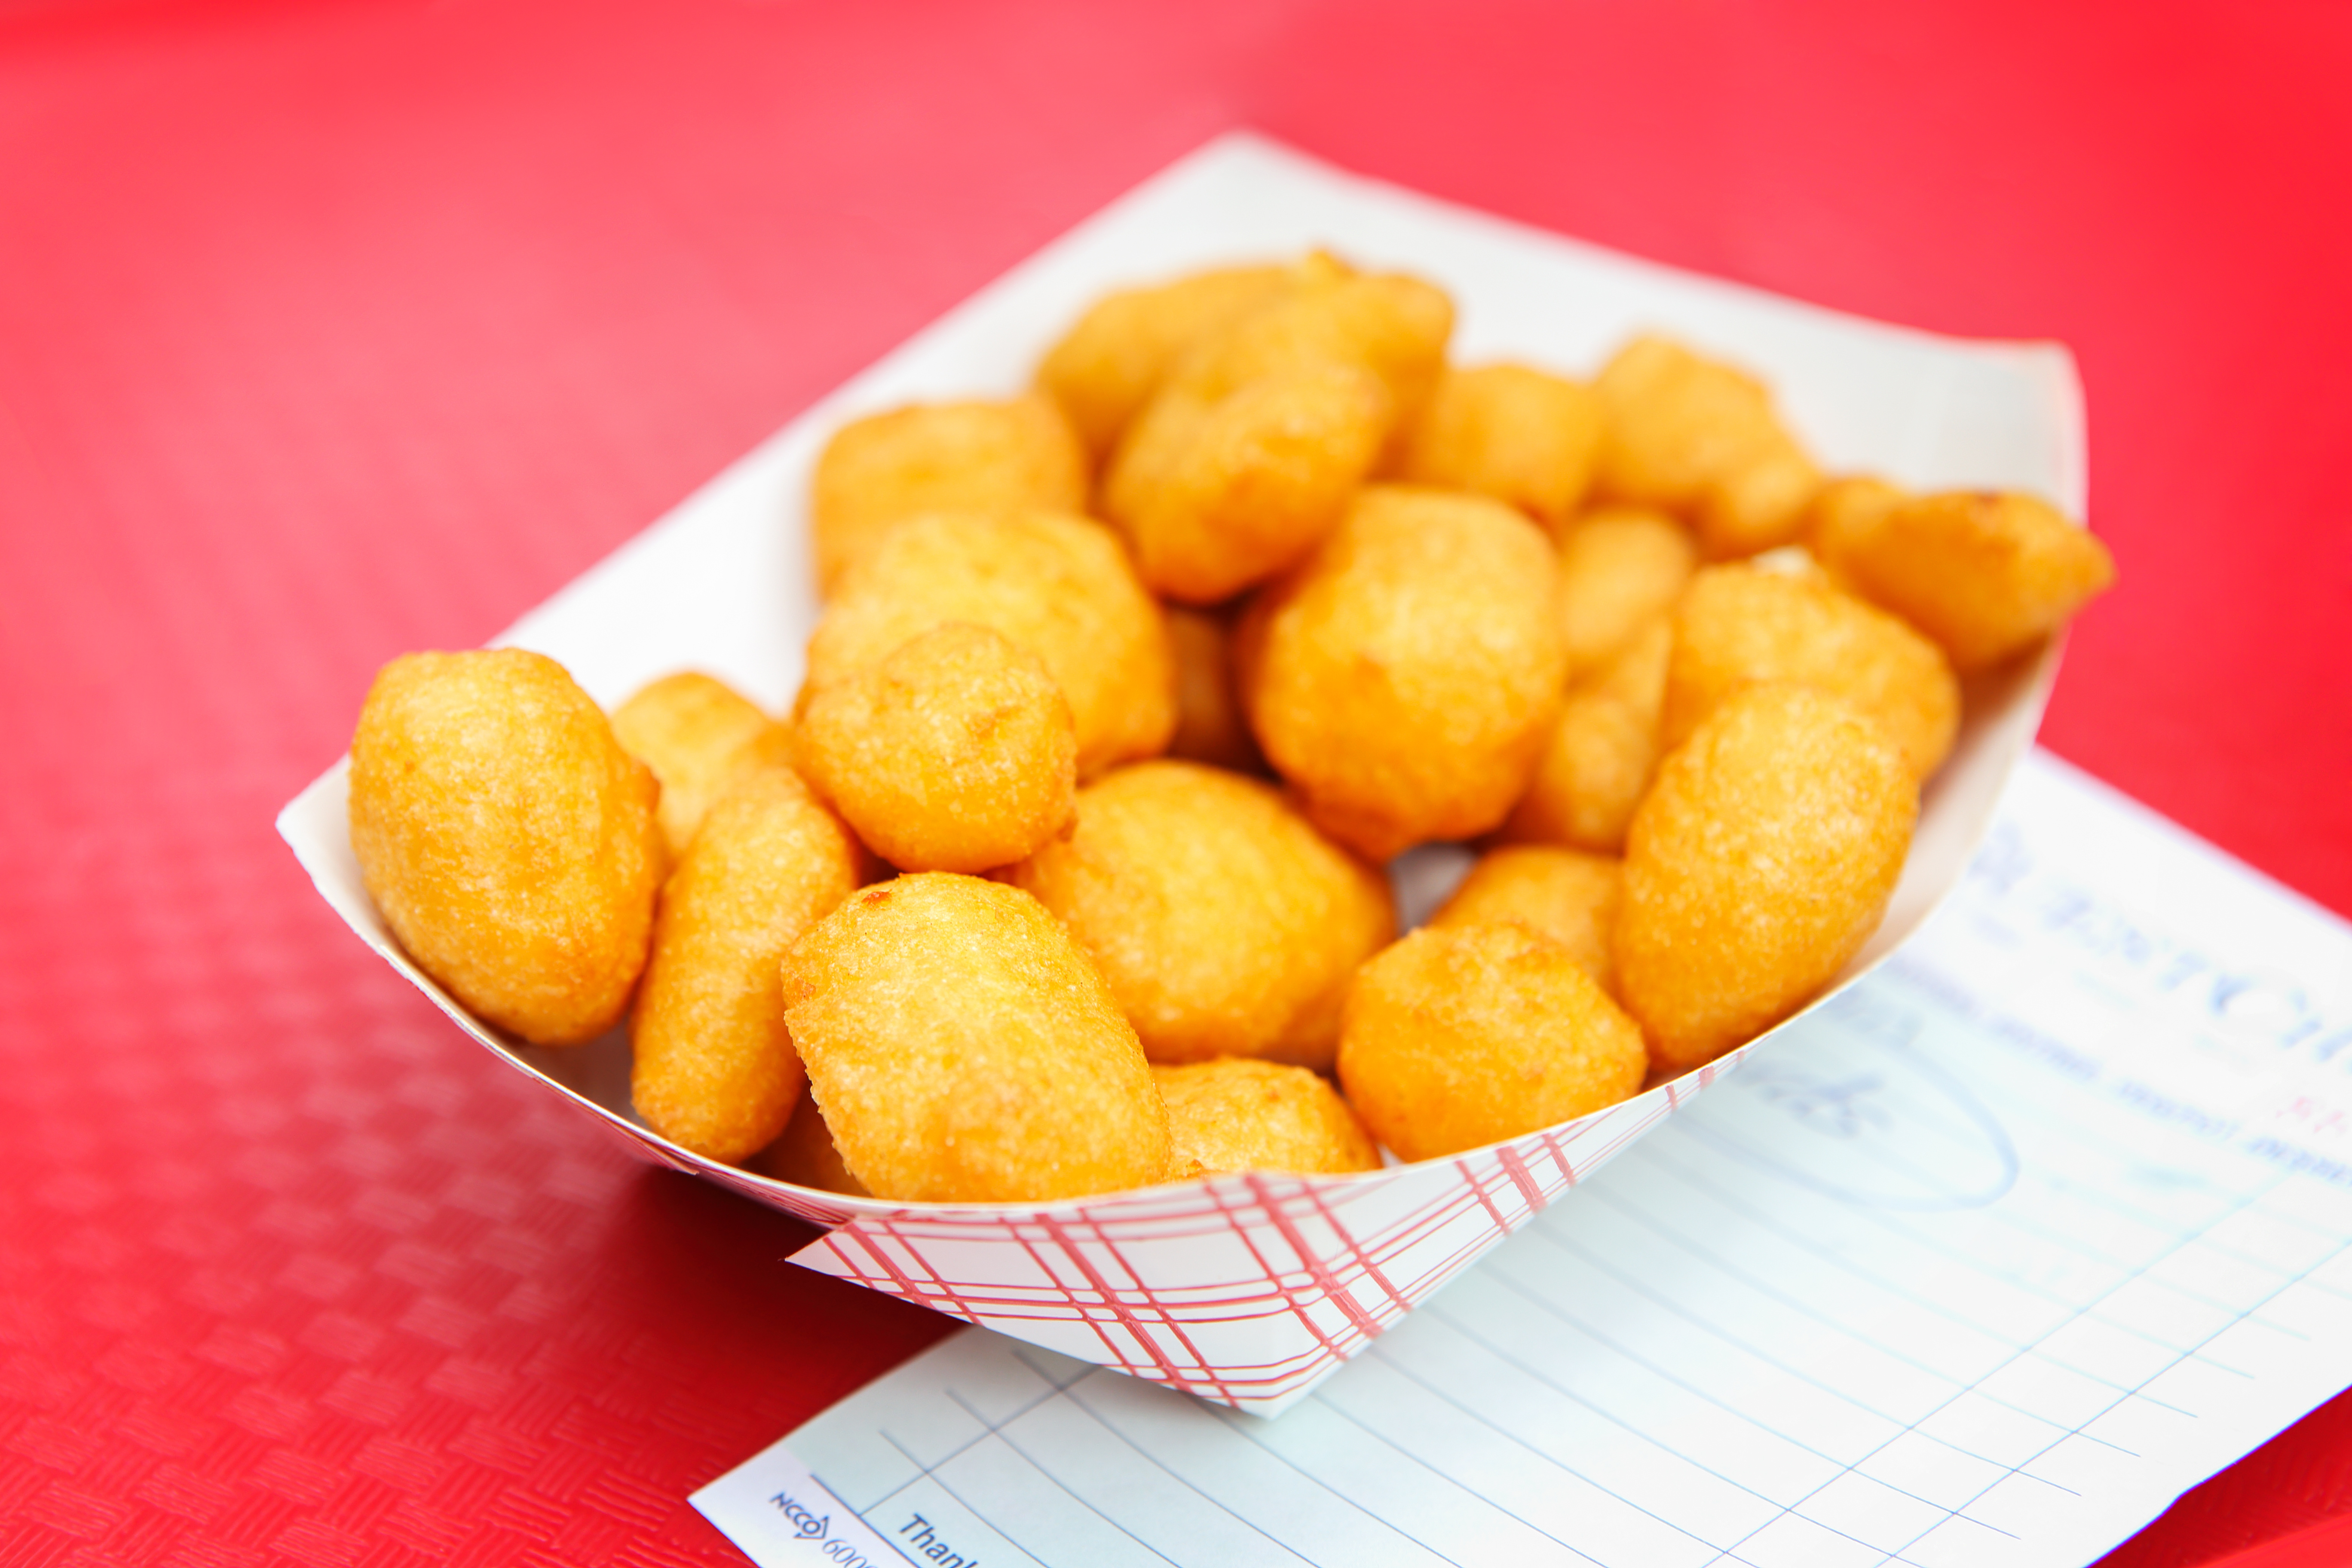 cheese-curds